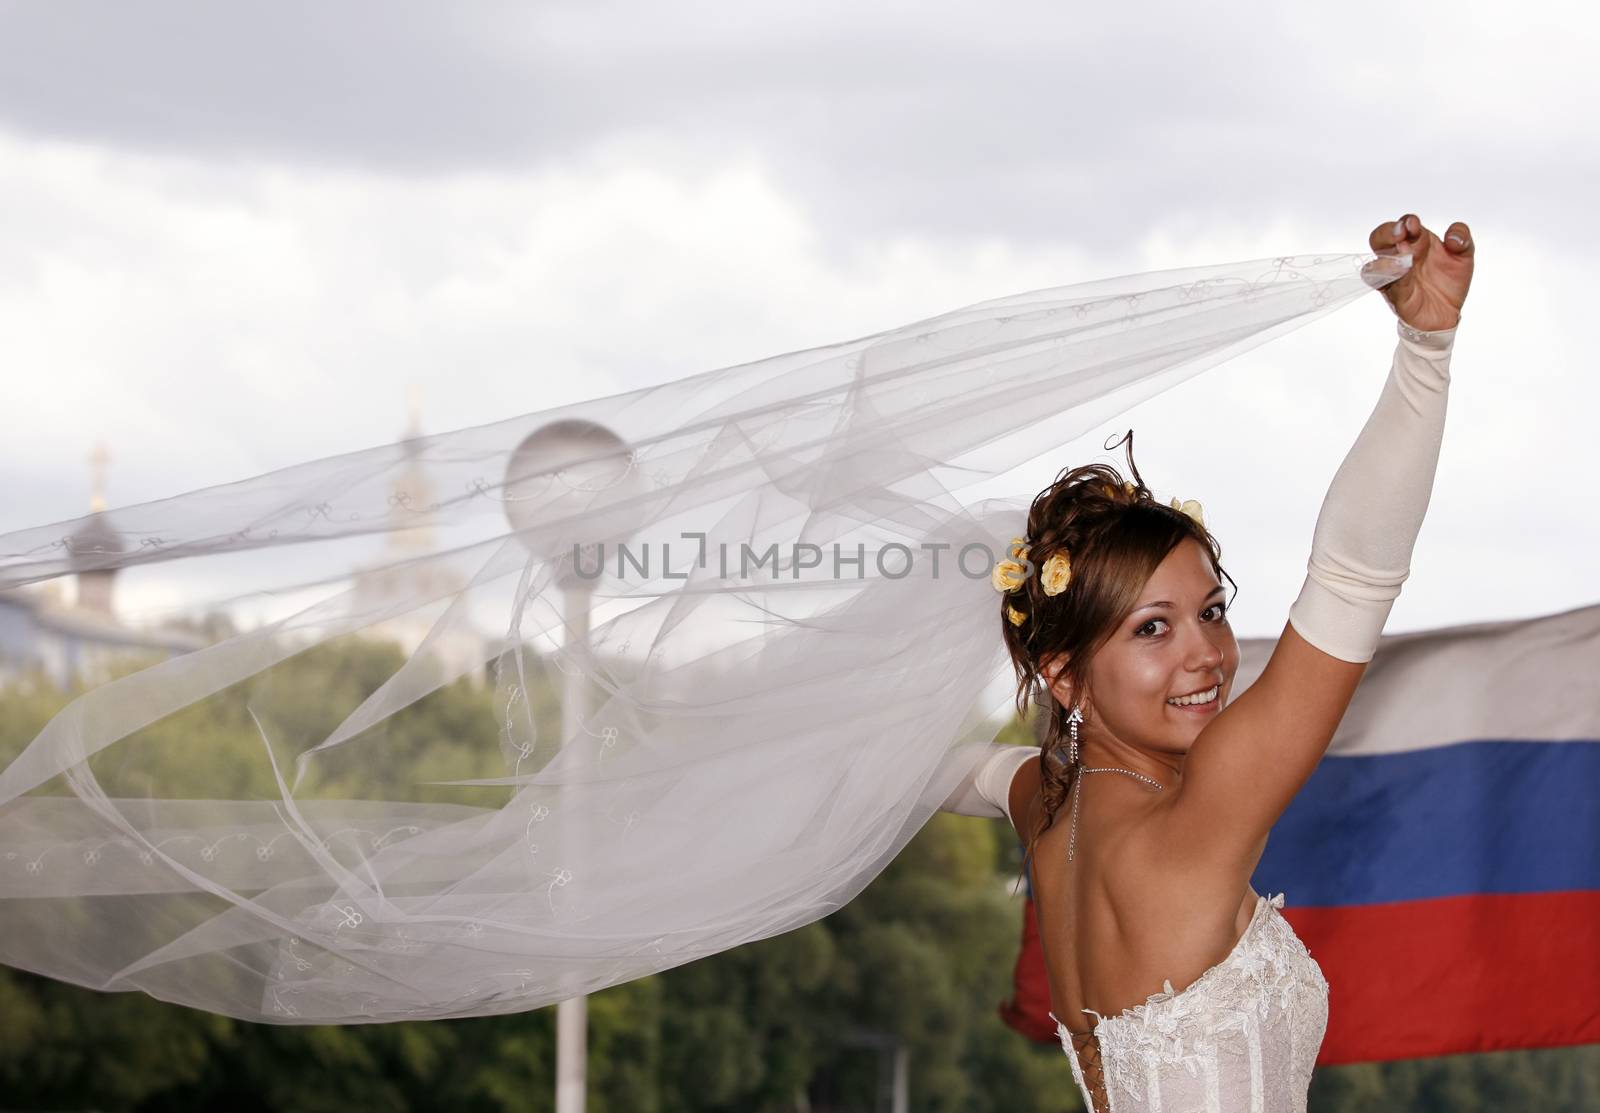 The happy bride on a background of the Russian flag